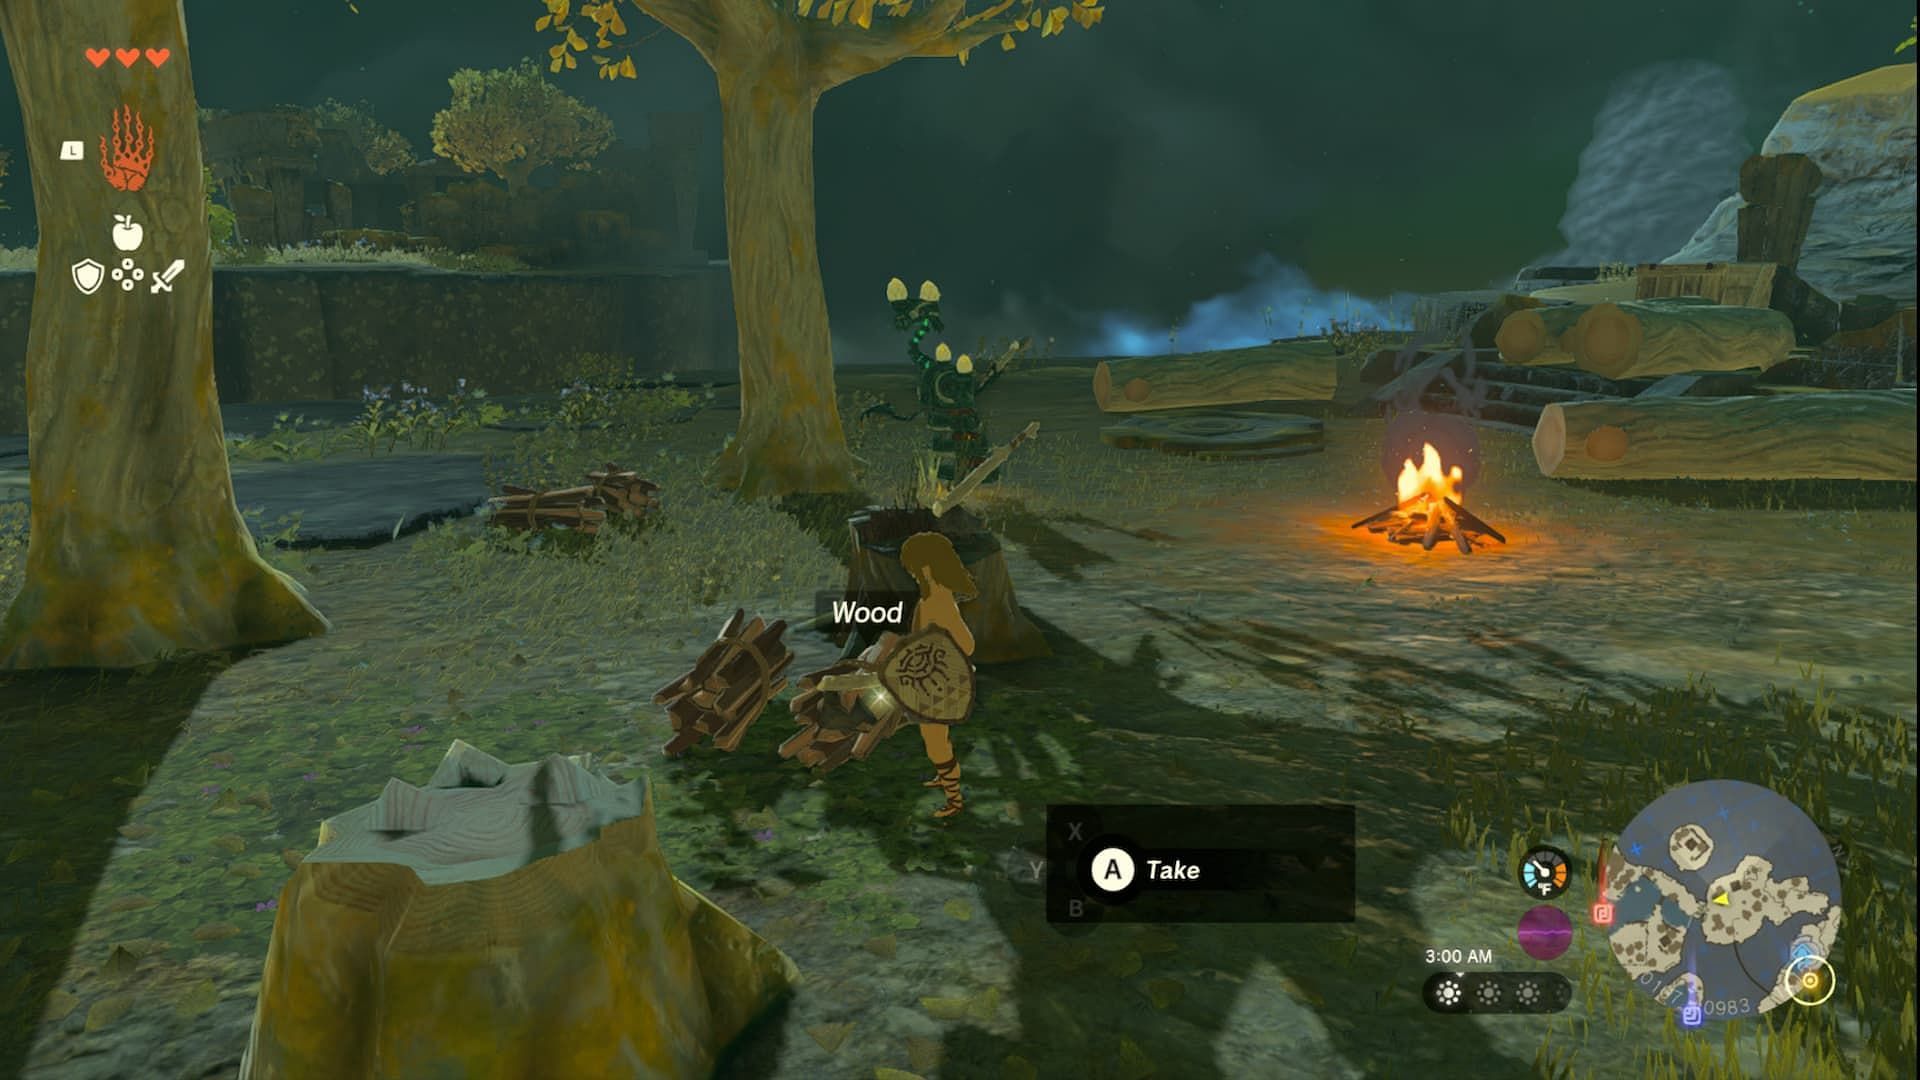 Wood can be picked up by cutting trees in The Legend of Zelda Tears of the Kingdom (Image via Nintendo)